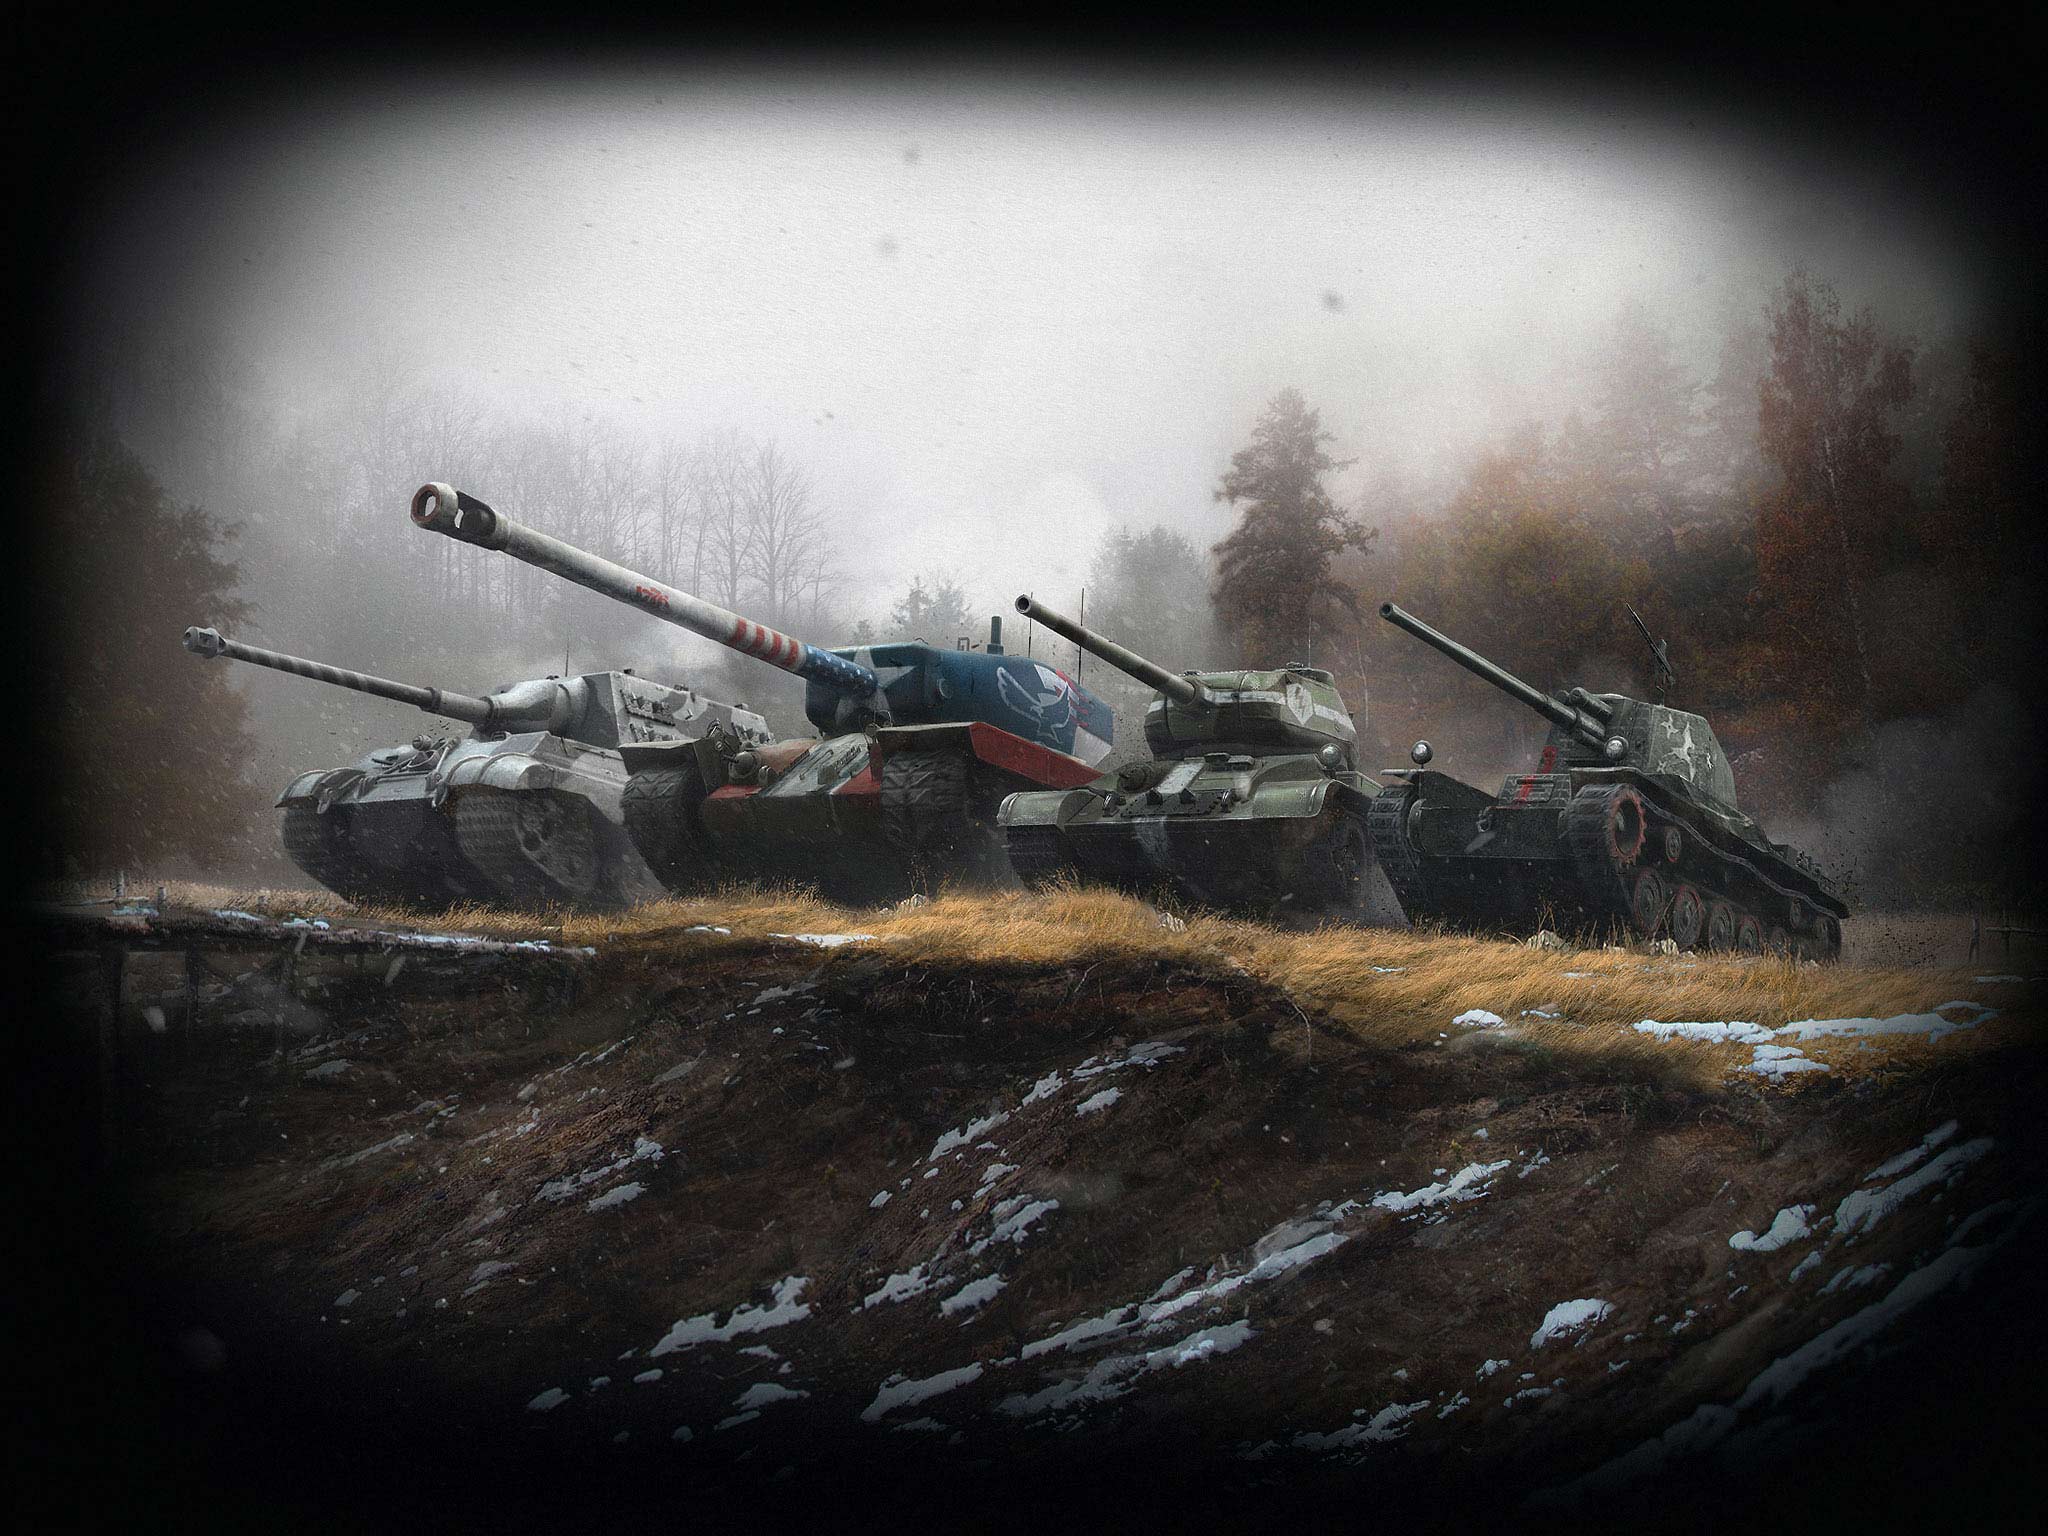 Another Blitz Wallpaper Collection of Tanks Blitz